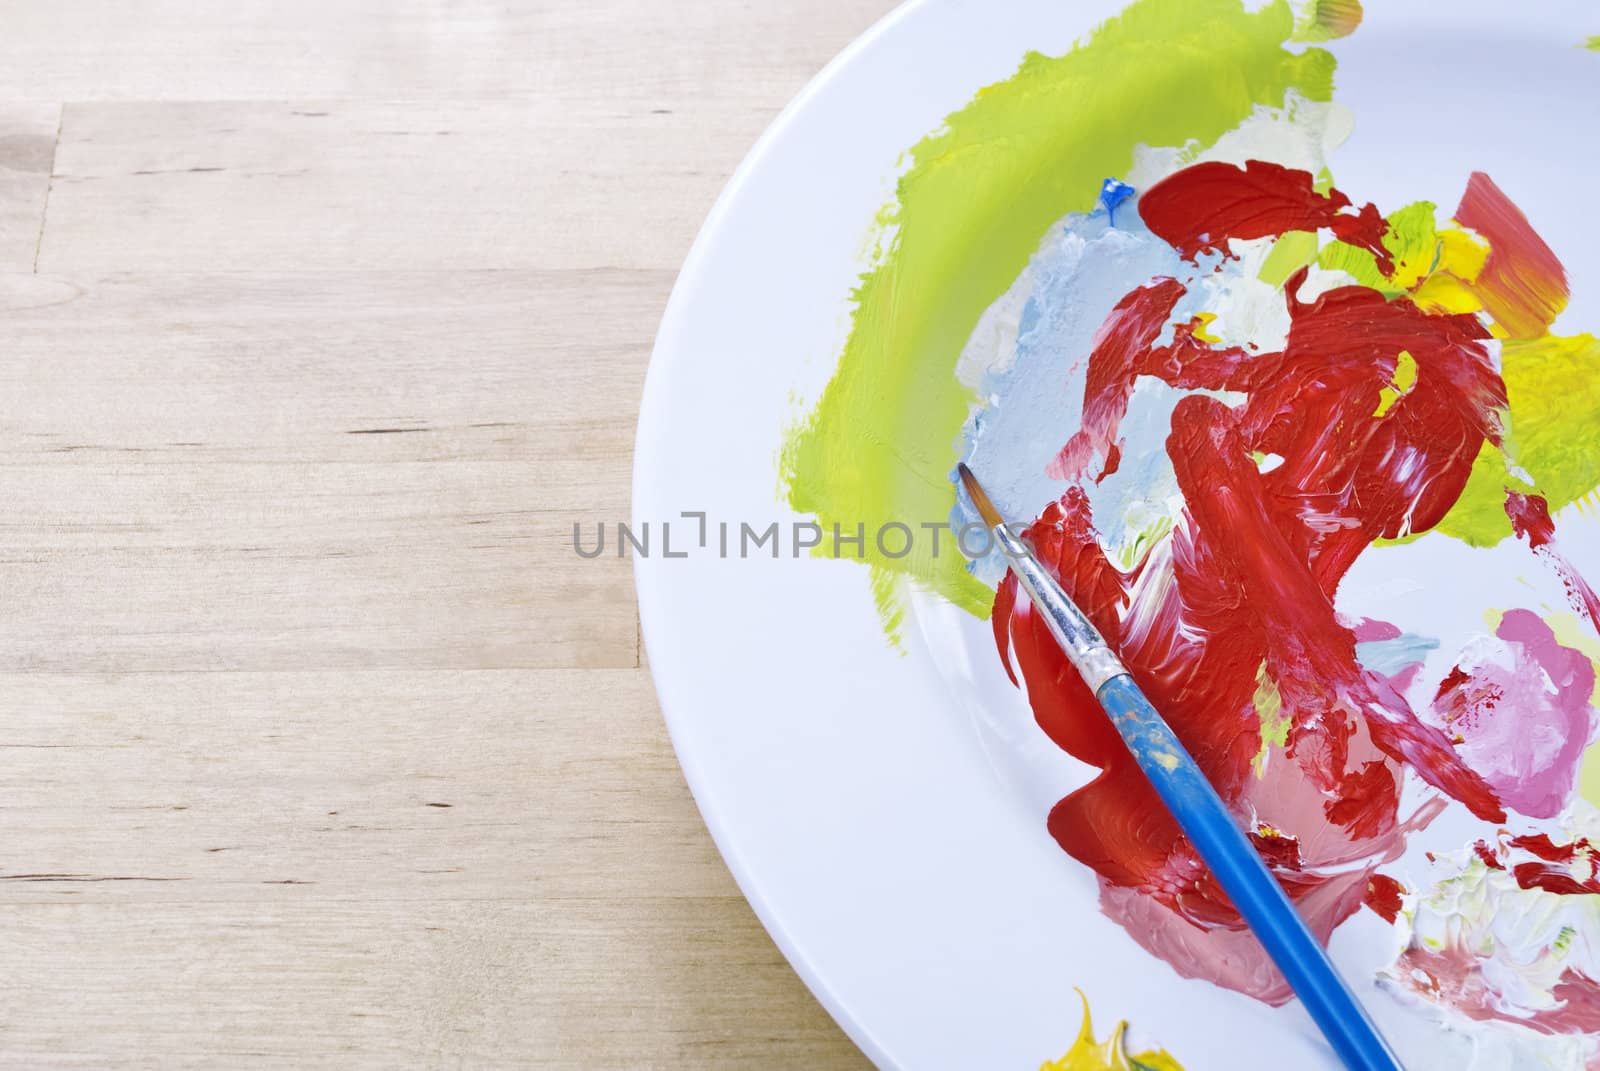 Colourful paints mixed on a china plate palette on a birch wooden table. Paintbrush resting on plate.  Copy space on left hand side.